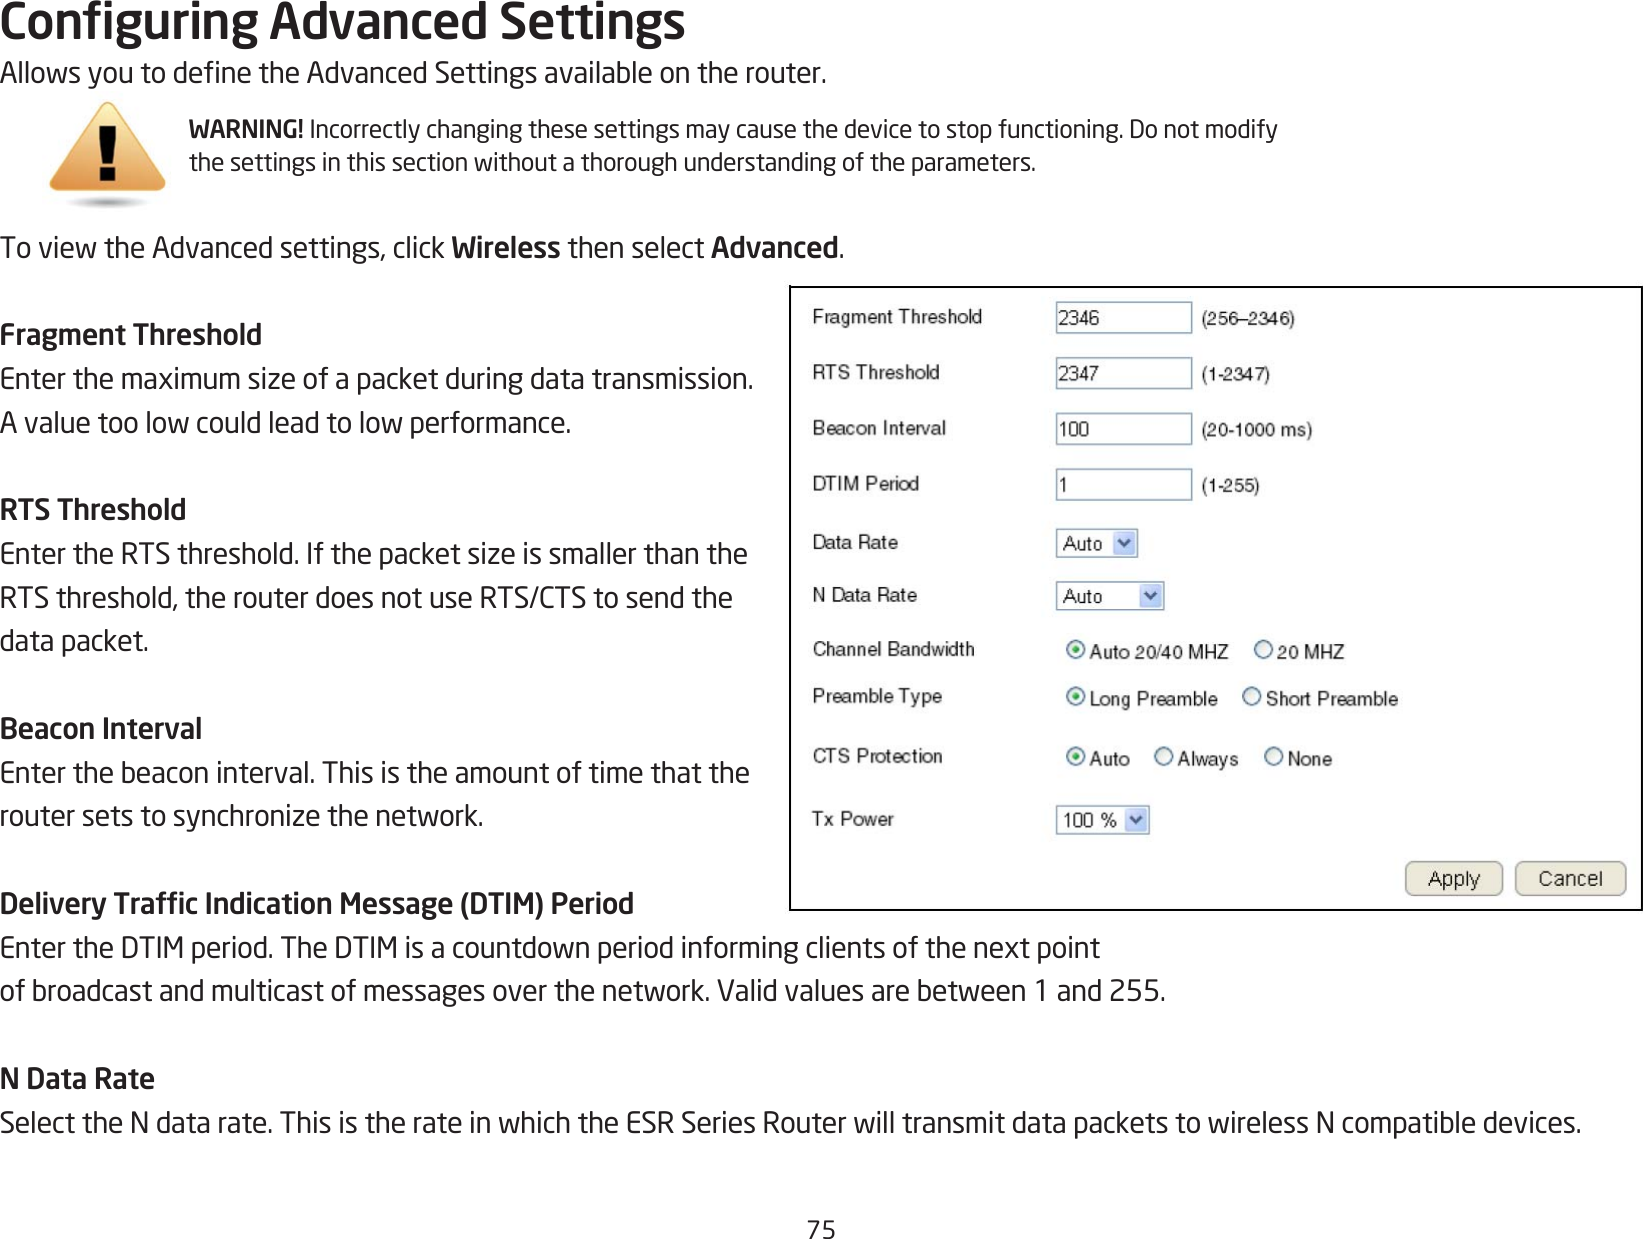 75Conguring Advanced SettingsAllowsyoutodenetheAdvancedSettingsavailableontherouter.ToviewtheAdvancedsettings,clickWireless then select Advanced.Fragment ThresholdEnterthemaximumsizeofapacketduringdatatransmission.Avaluetoolowcouldleadtolowperformance.RTS ThresholdEntertheRTSthreshold.IfthepacketsizeissmallerthantheRTSthreshold,therouterdoesnotuseRTS/CTStosendthedata packet.Beacon IntervalEnterthebeaconinterval.Thisistheamountoftimethattheroutersetstosynchronizethenetwork.Delivery Trafc Indication Message (DTIM) PeriodEntertheDTIMperiod.TheDTIMisacountdownperiodinformingclientsofthenextpointofbroadcastandmulticastofmessagesoverthenetwork.Validvaluesarebetween1and255.N Data RateSelecttheNdatarate.ThisistherateinwhichtheESRSeriesRouterwilltransmitdatapacketstowirelessNcompatibledevices.WARNING!Incorrectlychangingthesesettingsmaycausethedevicetostopfunctioning.Donotmodifythesettingsinthissectionwithoutathoroughunderstandingoftheparameters.